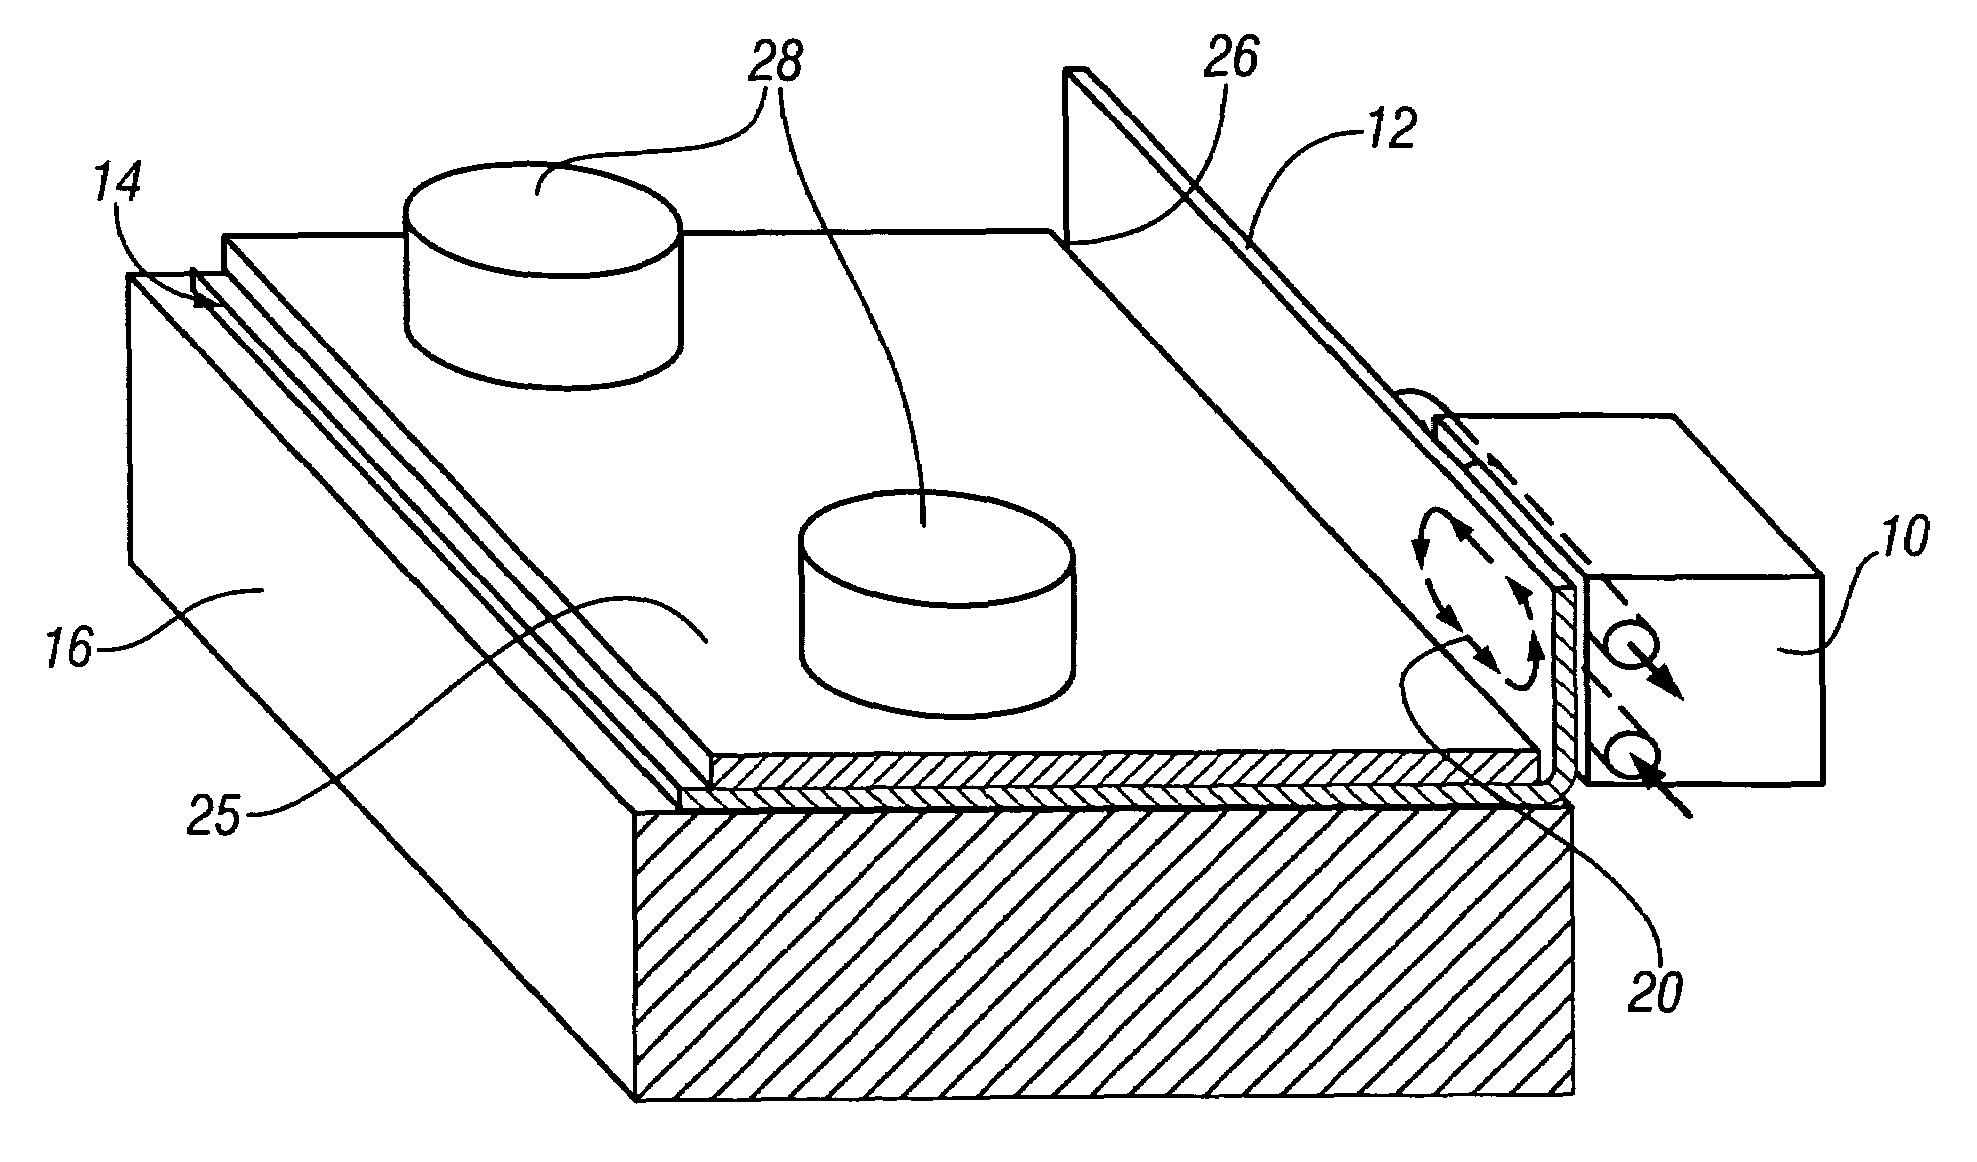 Electromagnetic flanging and hemming apparatus and method